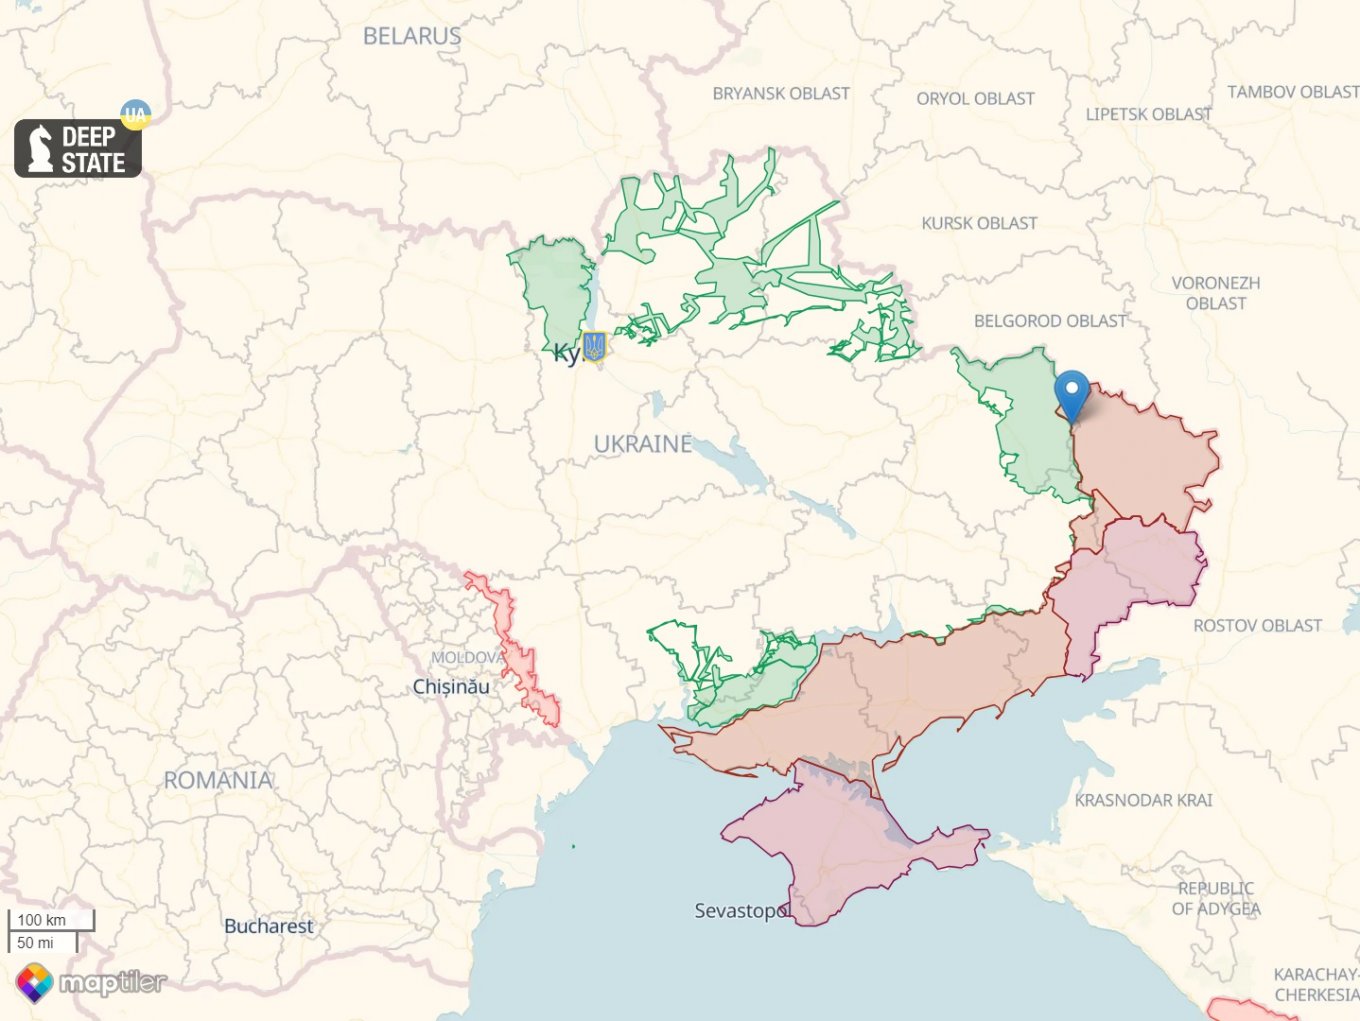 The approximate location of this battle on the map of Ukraine, with current russian-occupied territories highlighted in red